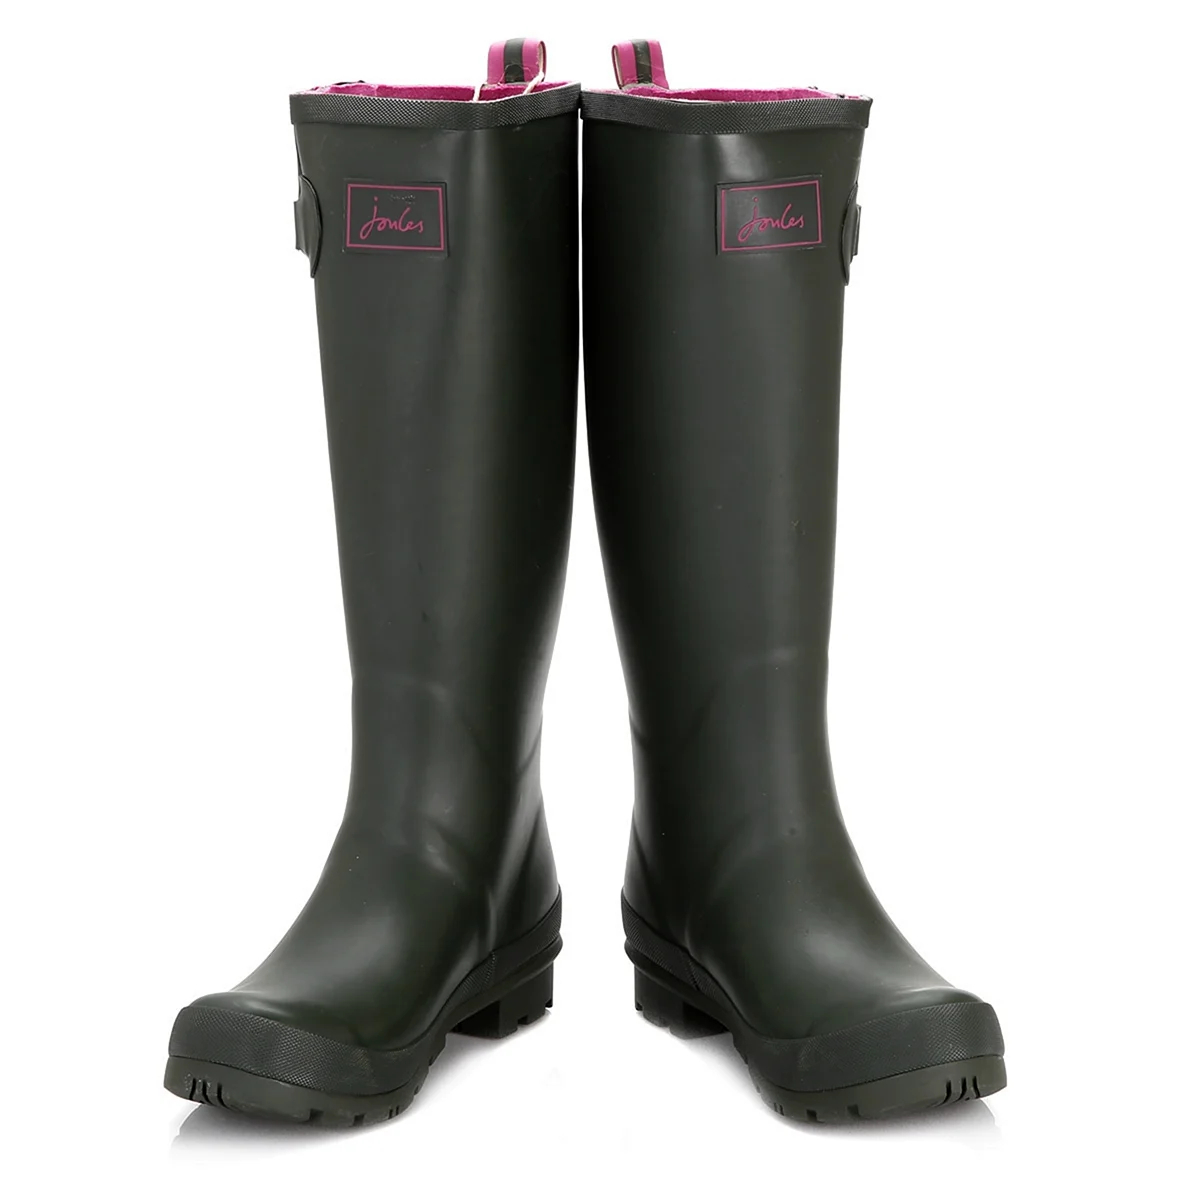 Wellingtons Wellies Rubber Boots